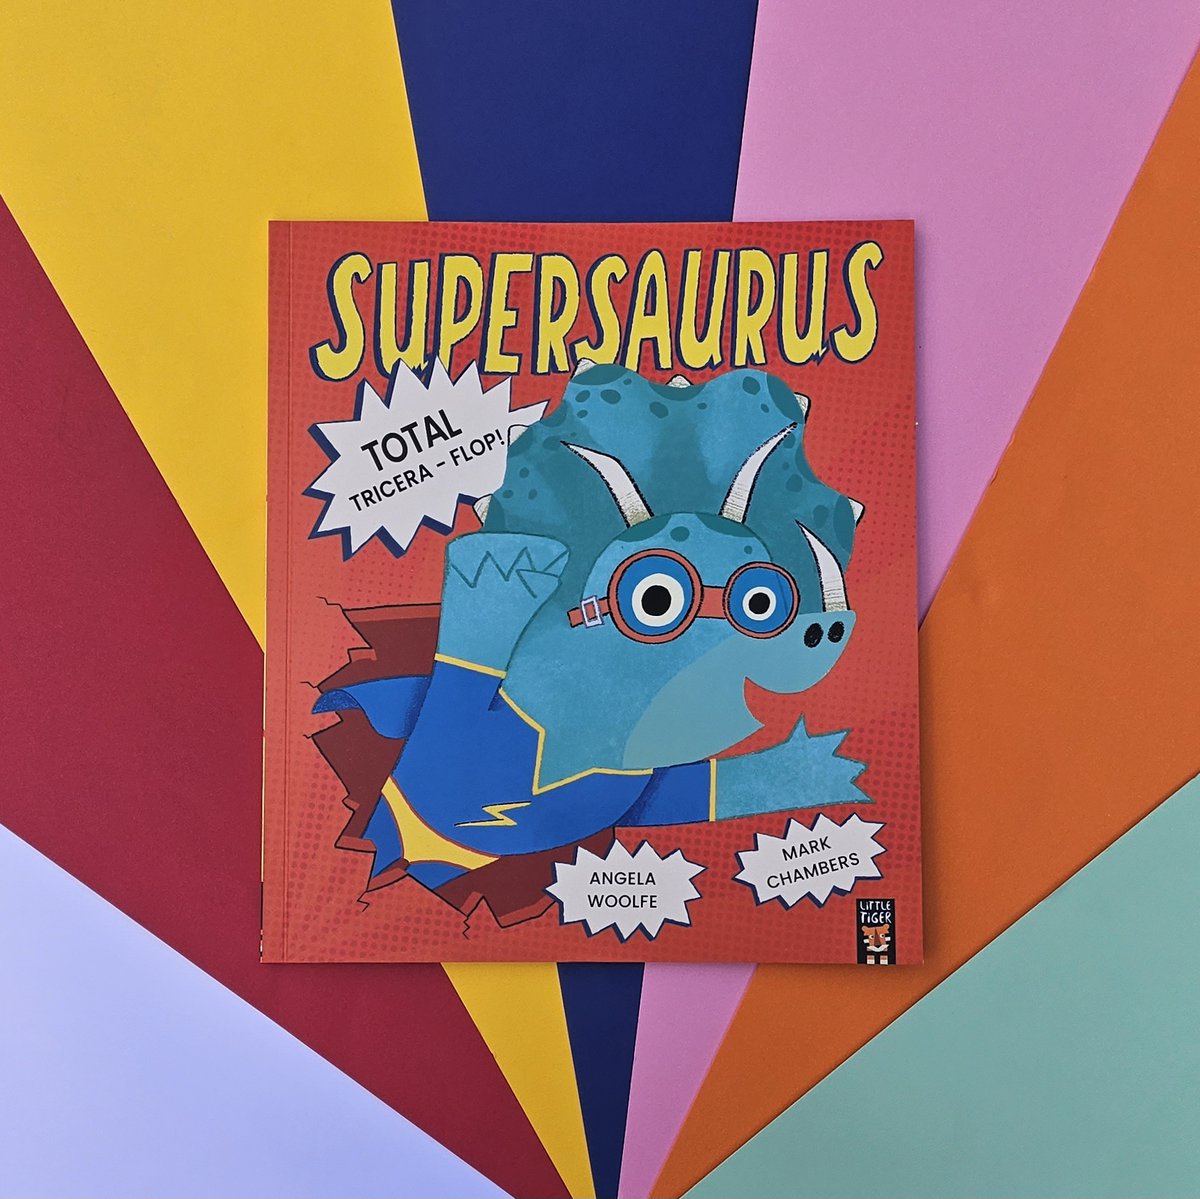 Dinosaurs meet superheroes in this super-silly, super-funny rhyming superhero picture book written by @WoolfeAngela and illustrated in a young comic-book style by @markAchambers. 🦕 Out now!